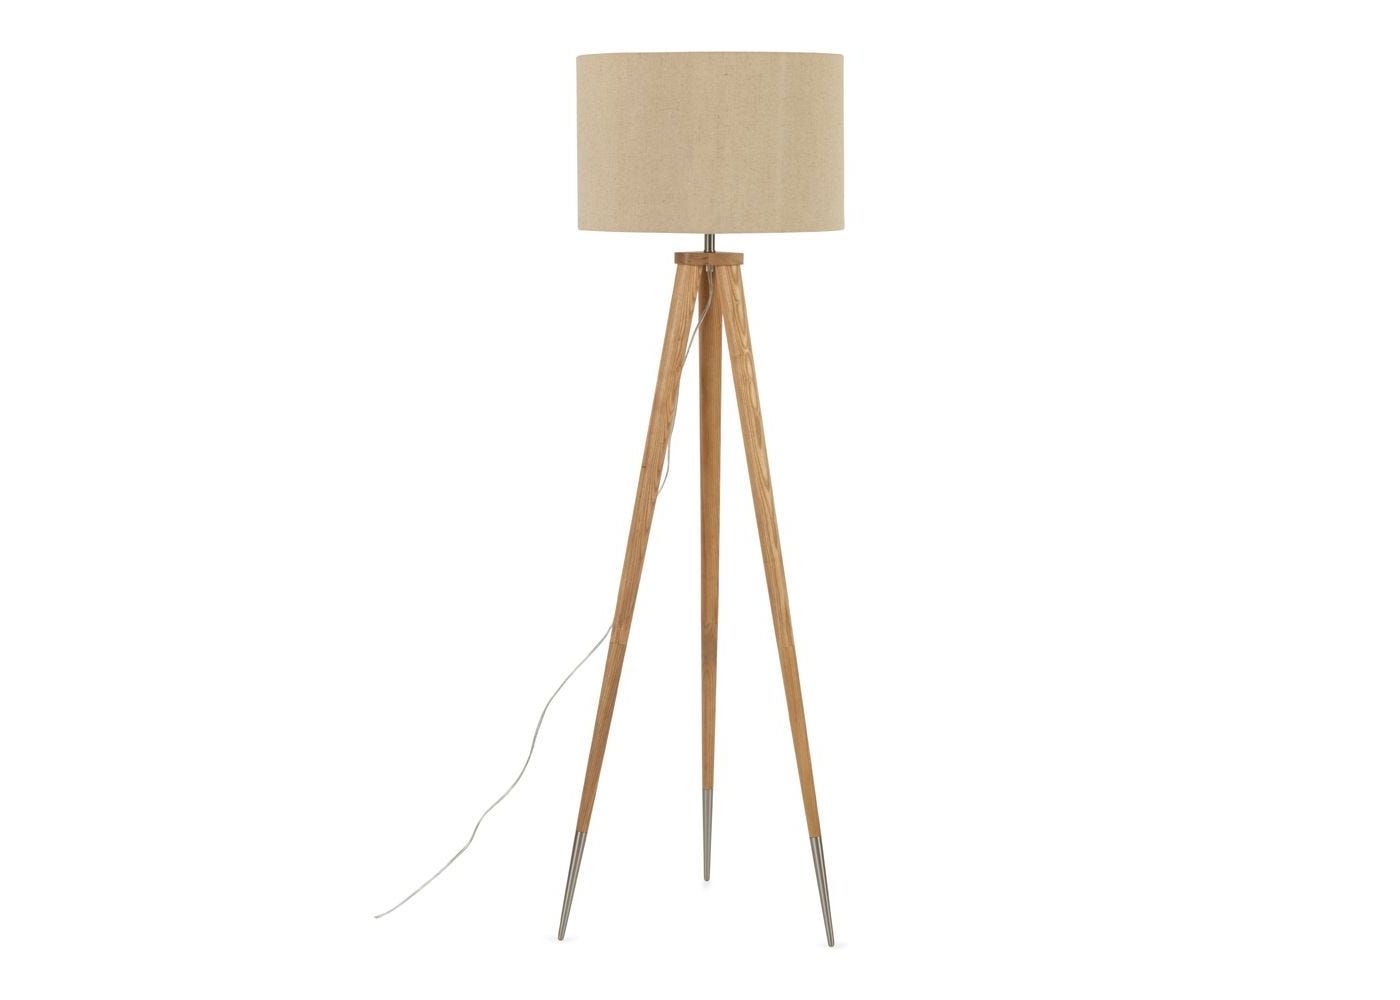 Wood Tripod Standing Lamps Within Widely Used Hawkins Tripod Floor Lamp With Shade (View 3 of 10)